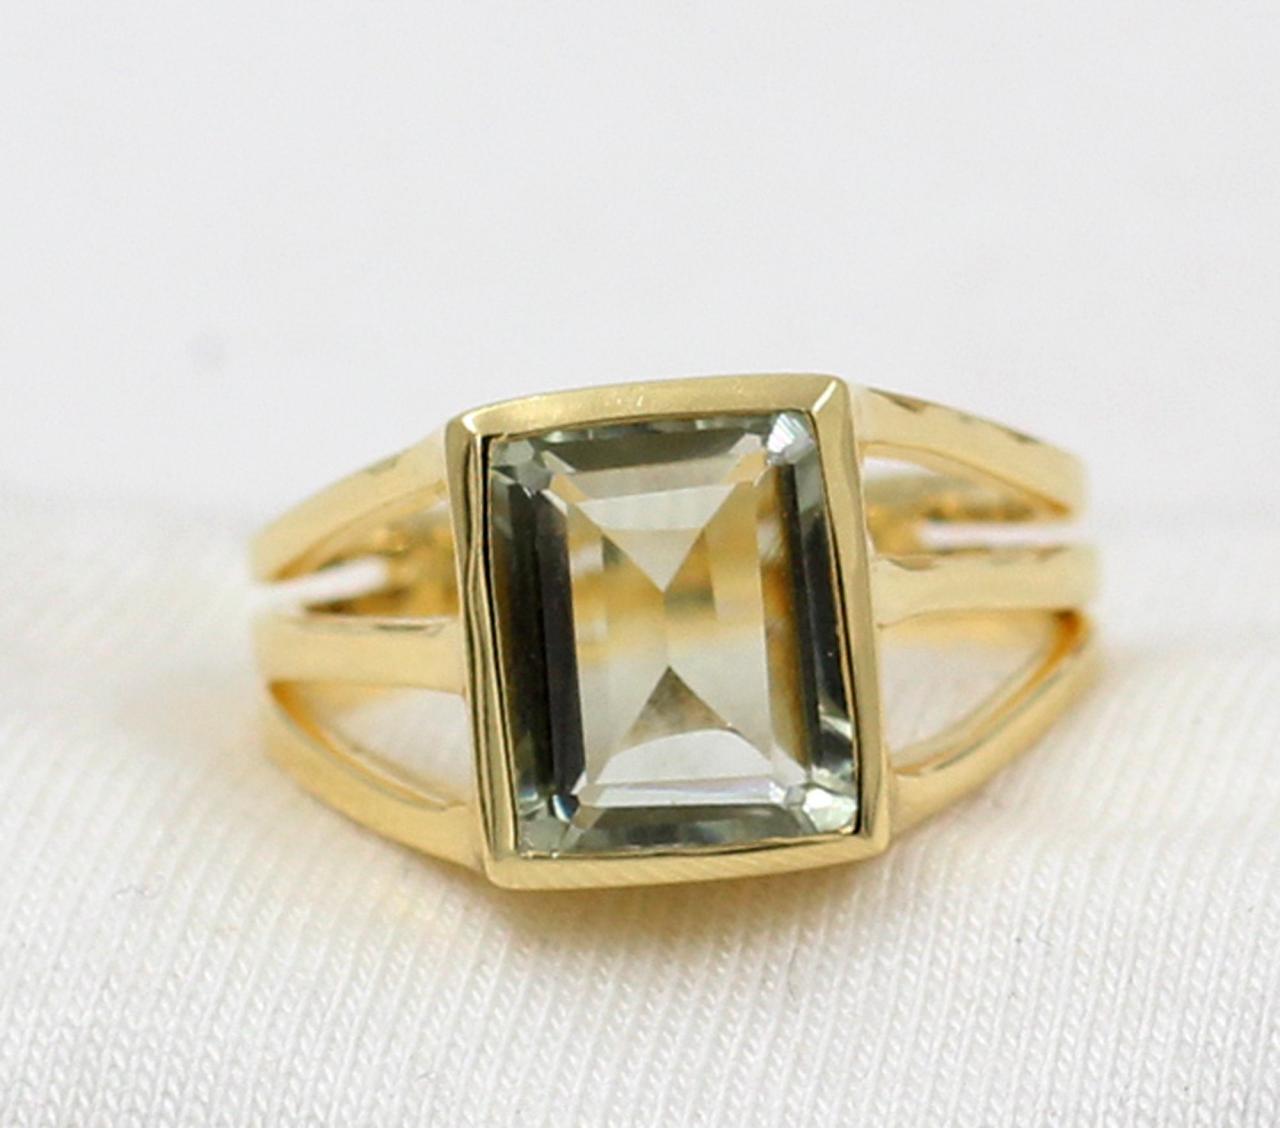 Green Amethyst Ring,faceted Baguette,modern Minimalist Ring,men's Solitaire Ring,925 Sterling Silver Women Jewelry,anniversary Gift,